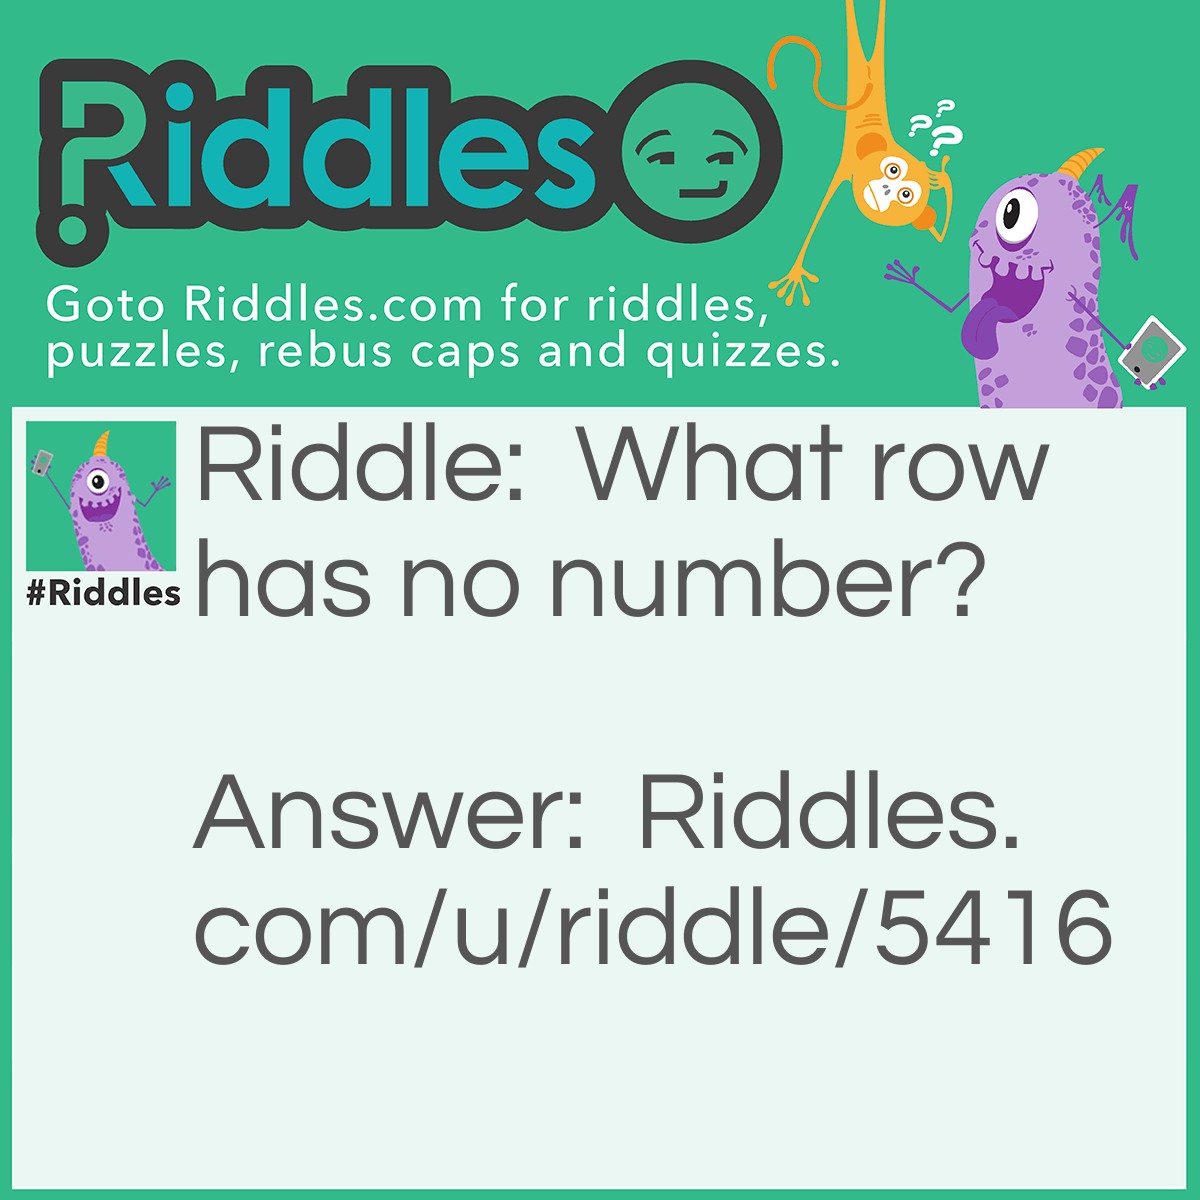 Riddle: What row has no number? Answer: An ARrow